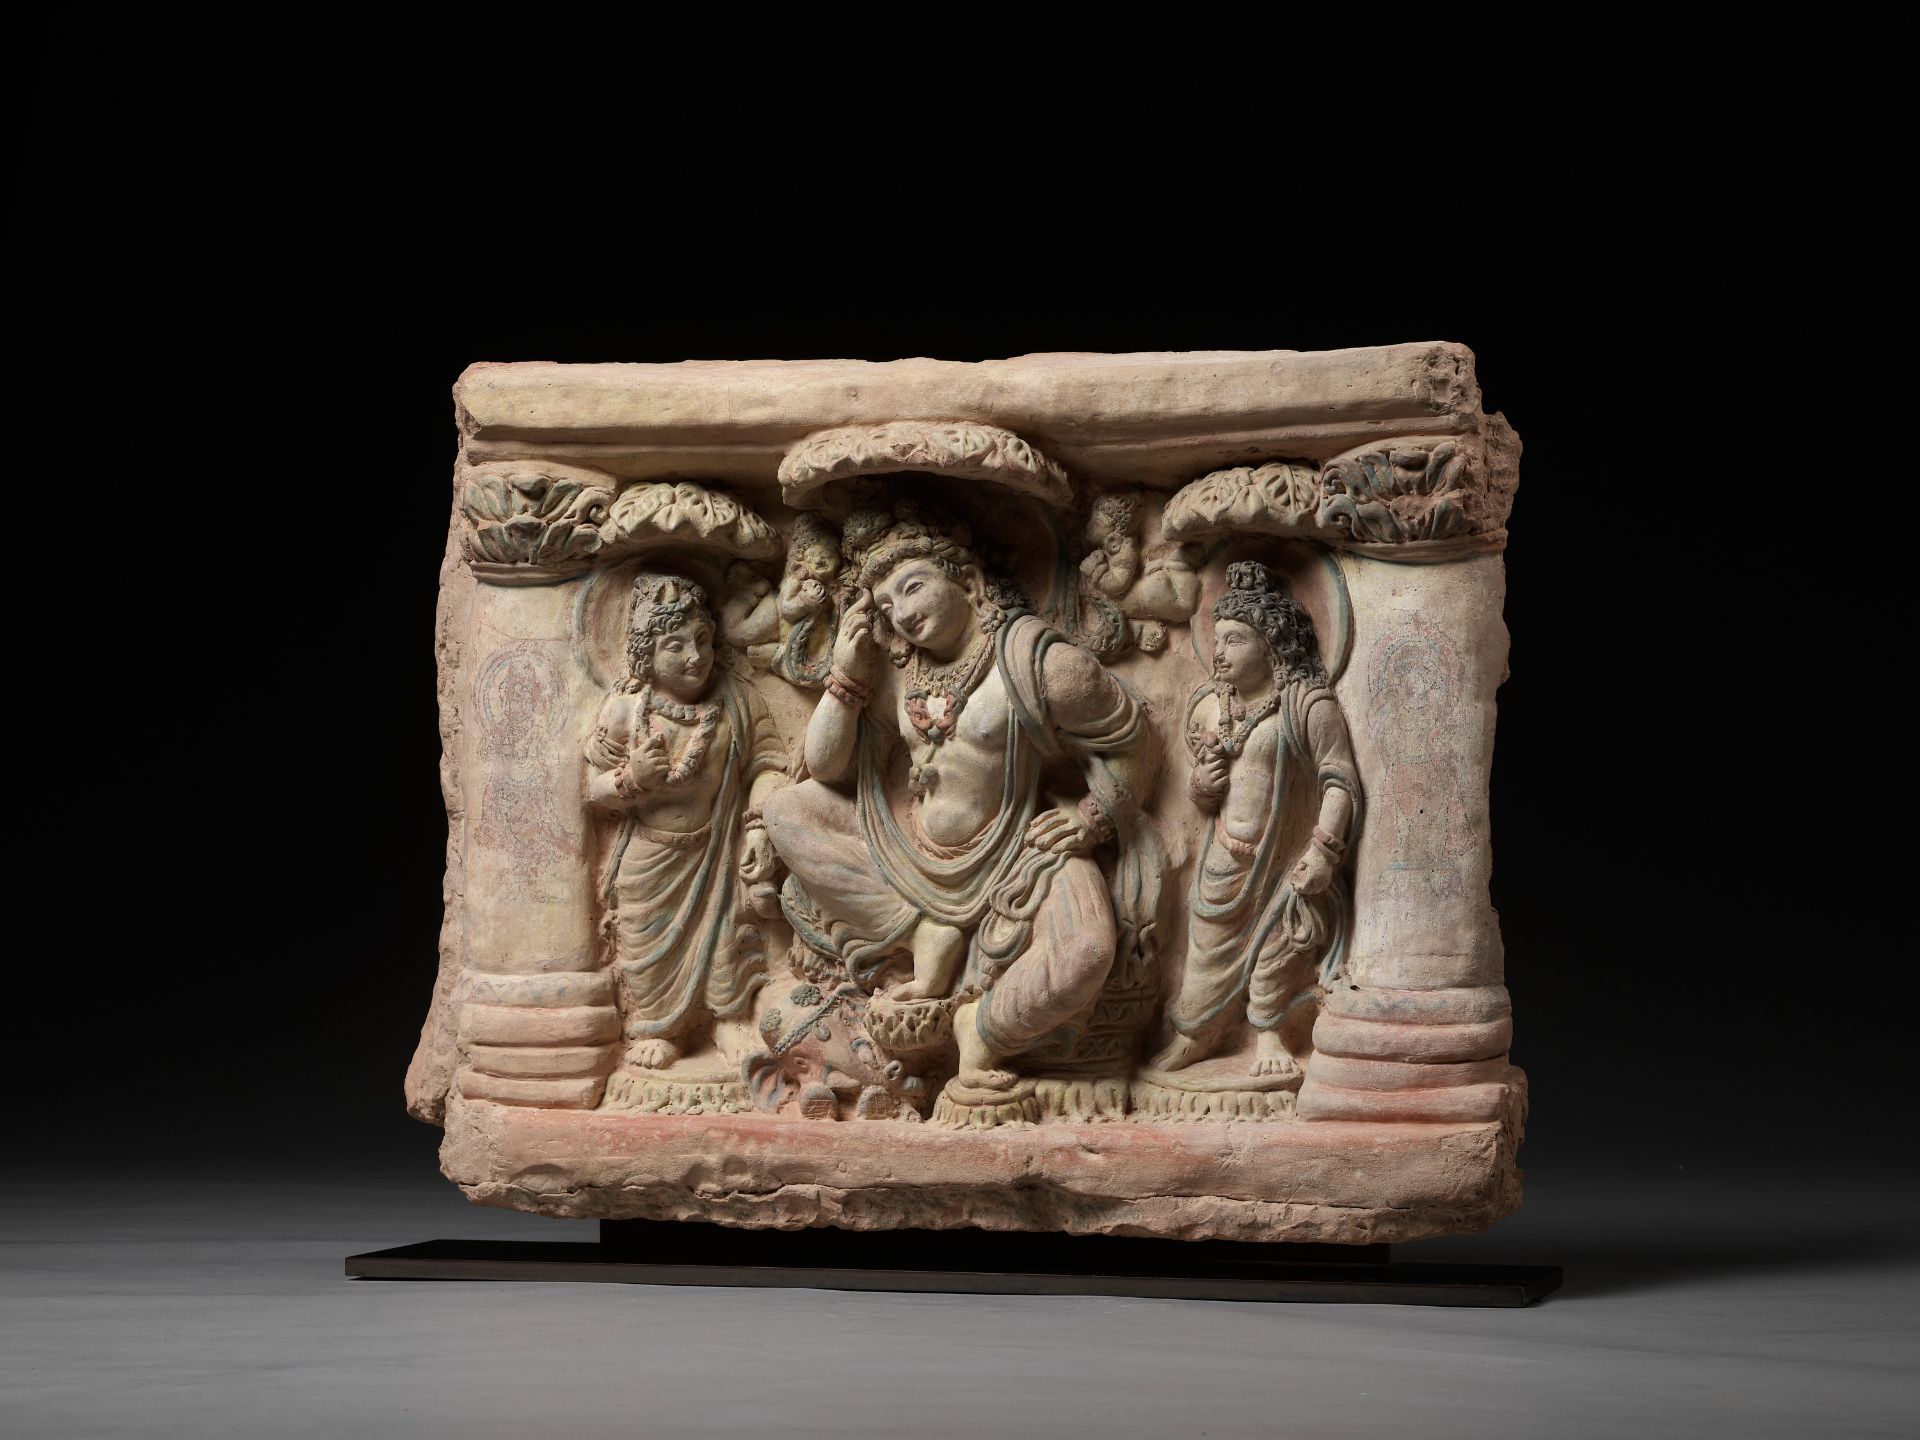 A TERRACOTTA RELIEF OF A THINKING PRINCE SIDDHARTA UNDER THE BODHI TREE, ANCIENT REGION OF GANDHARA - Image 16 of 19